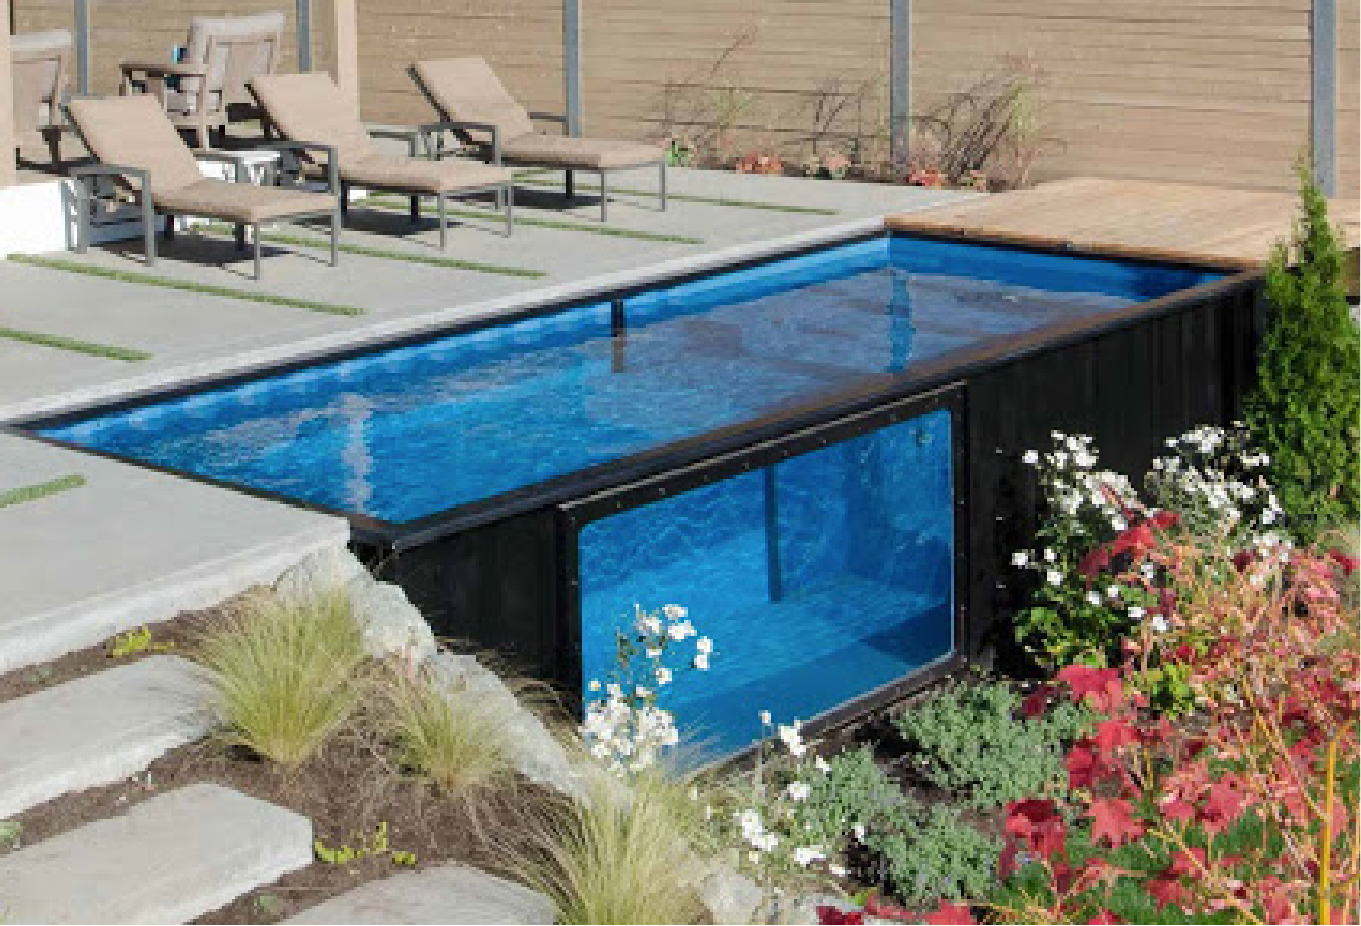 terrain-landscaping-seattle-favorite-products-infinity-pool-modpools.png